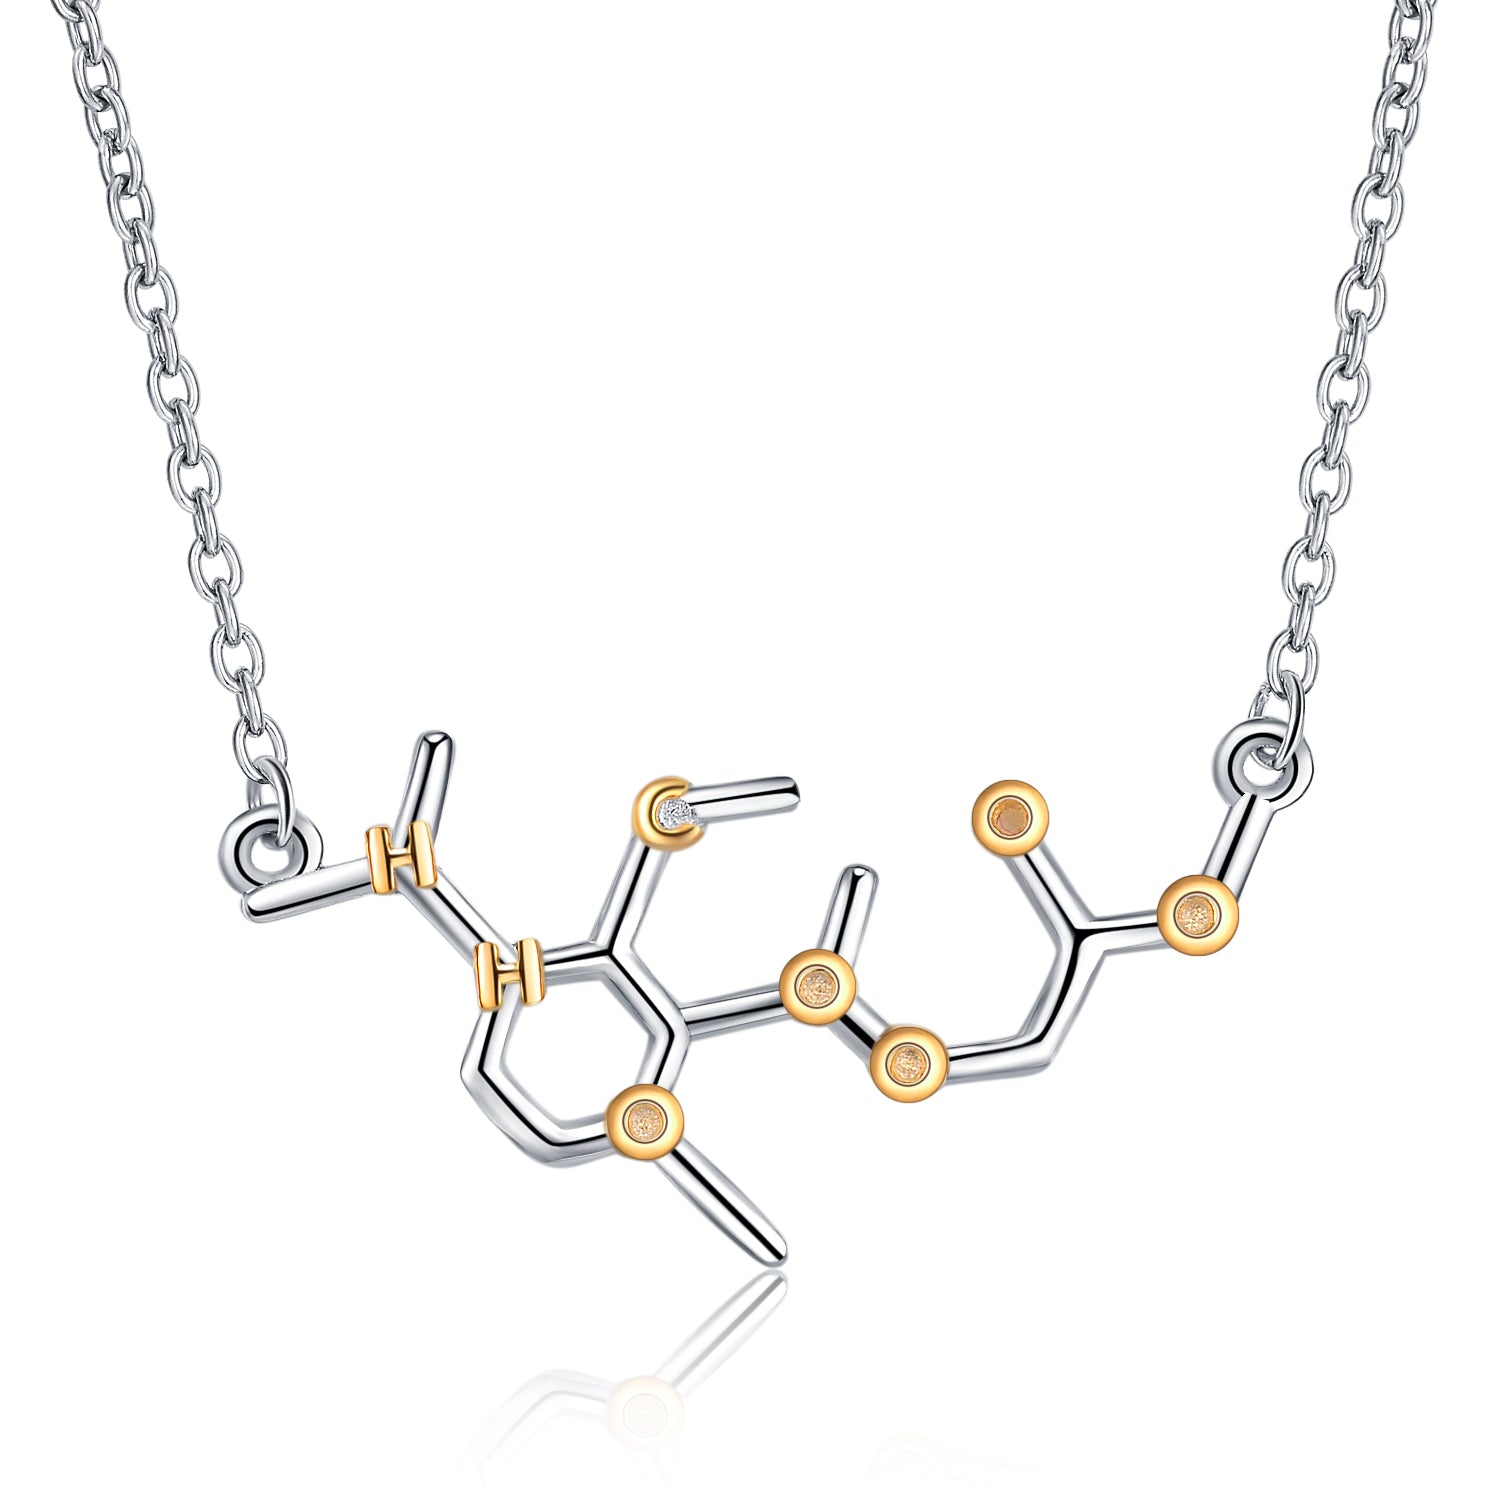 Molecular Necklace Chemical Knowledge Technology Man Popular Necklace